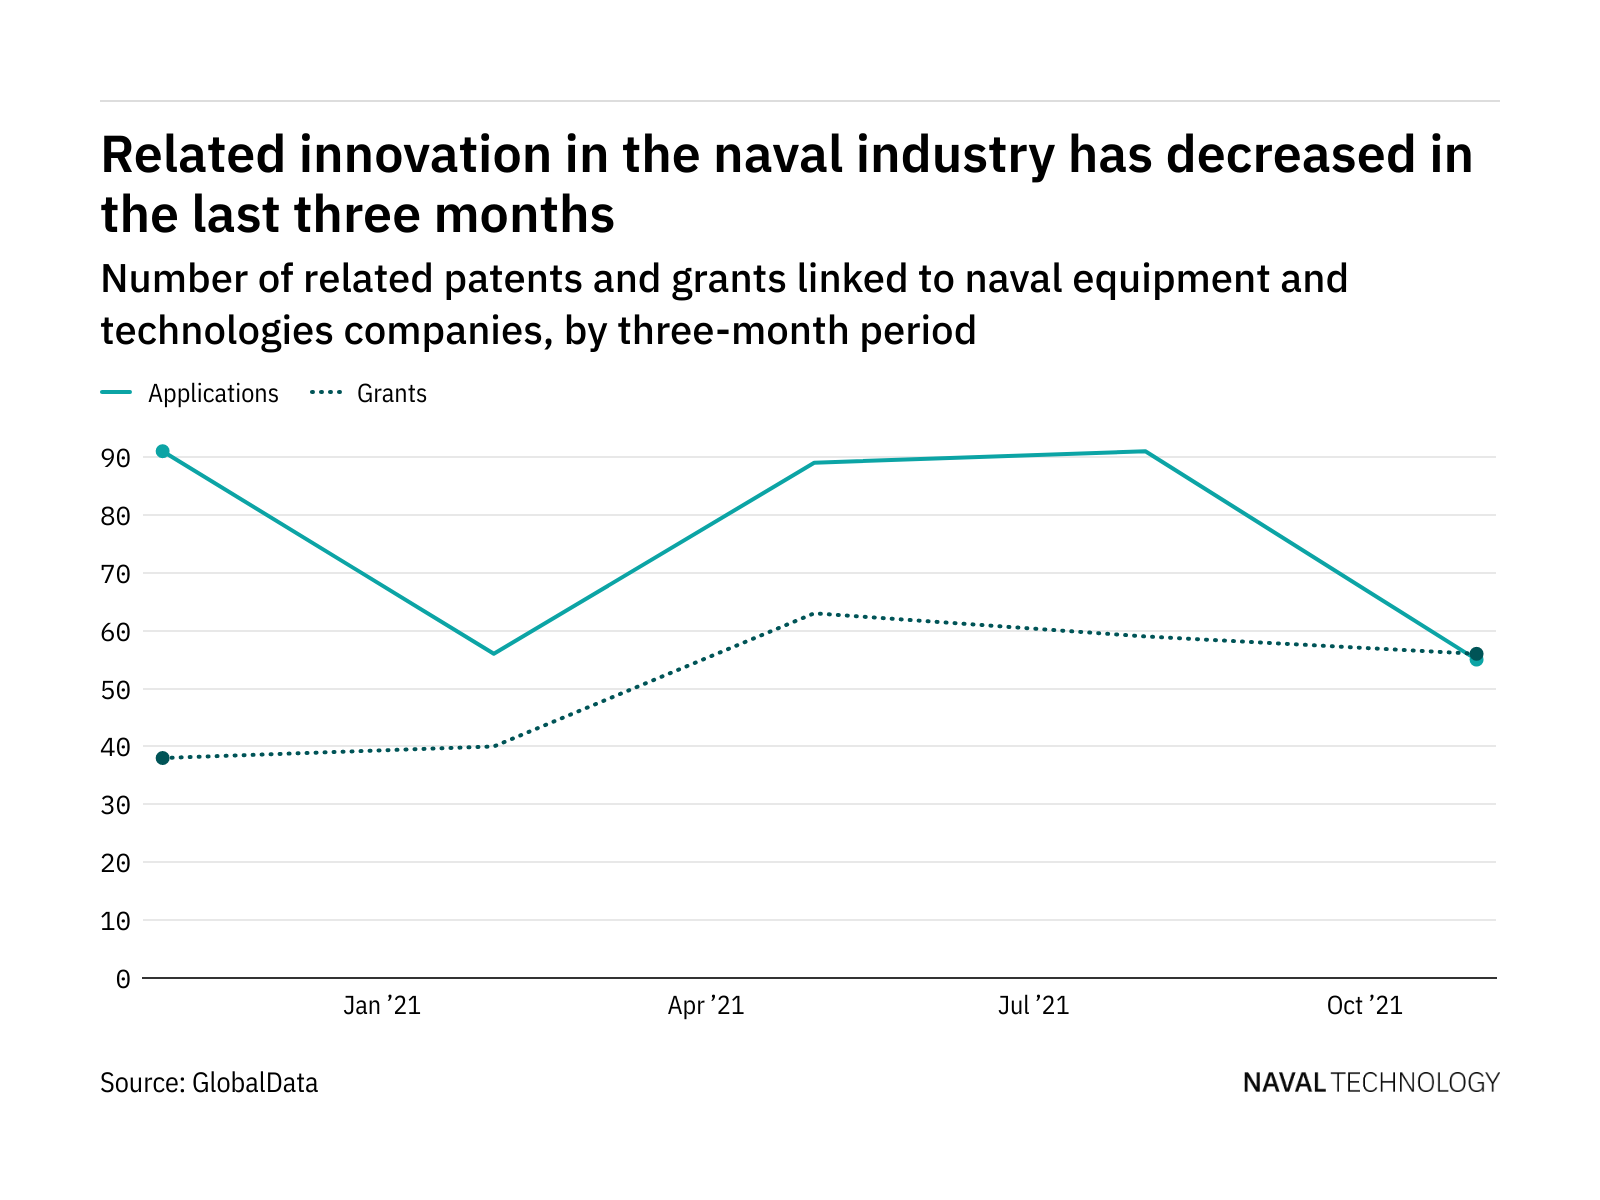 Cybersecurity innovation among naval industry companies has dropped off in the last year